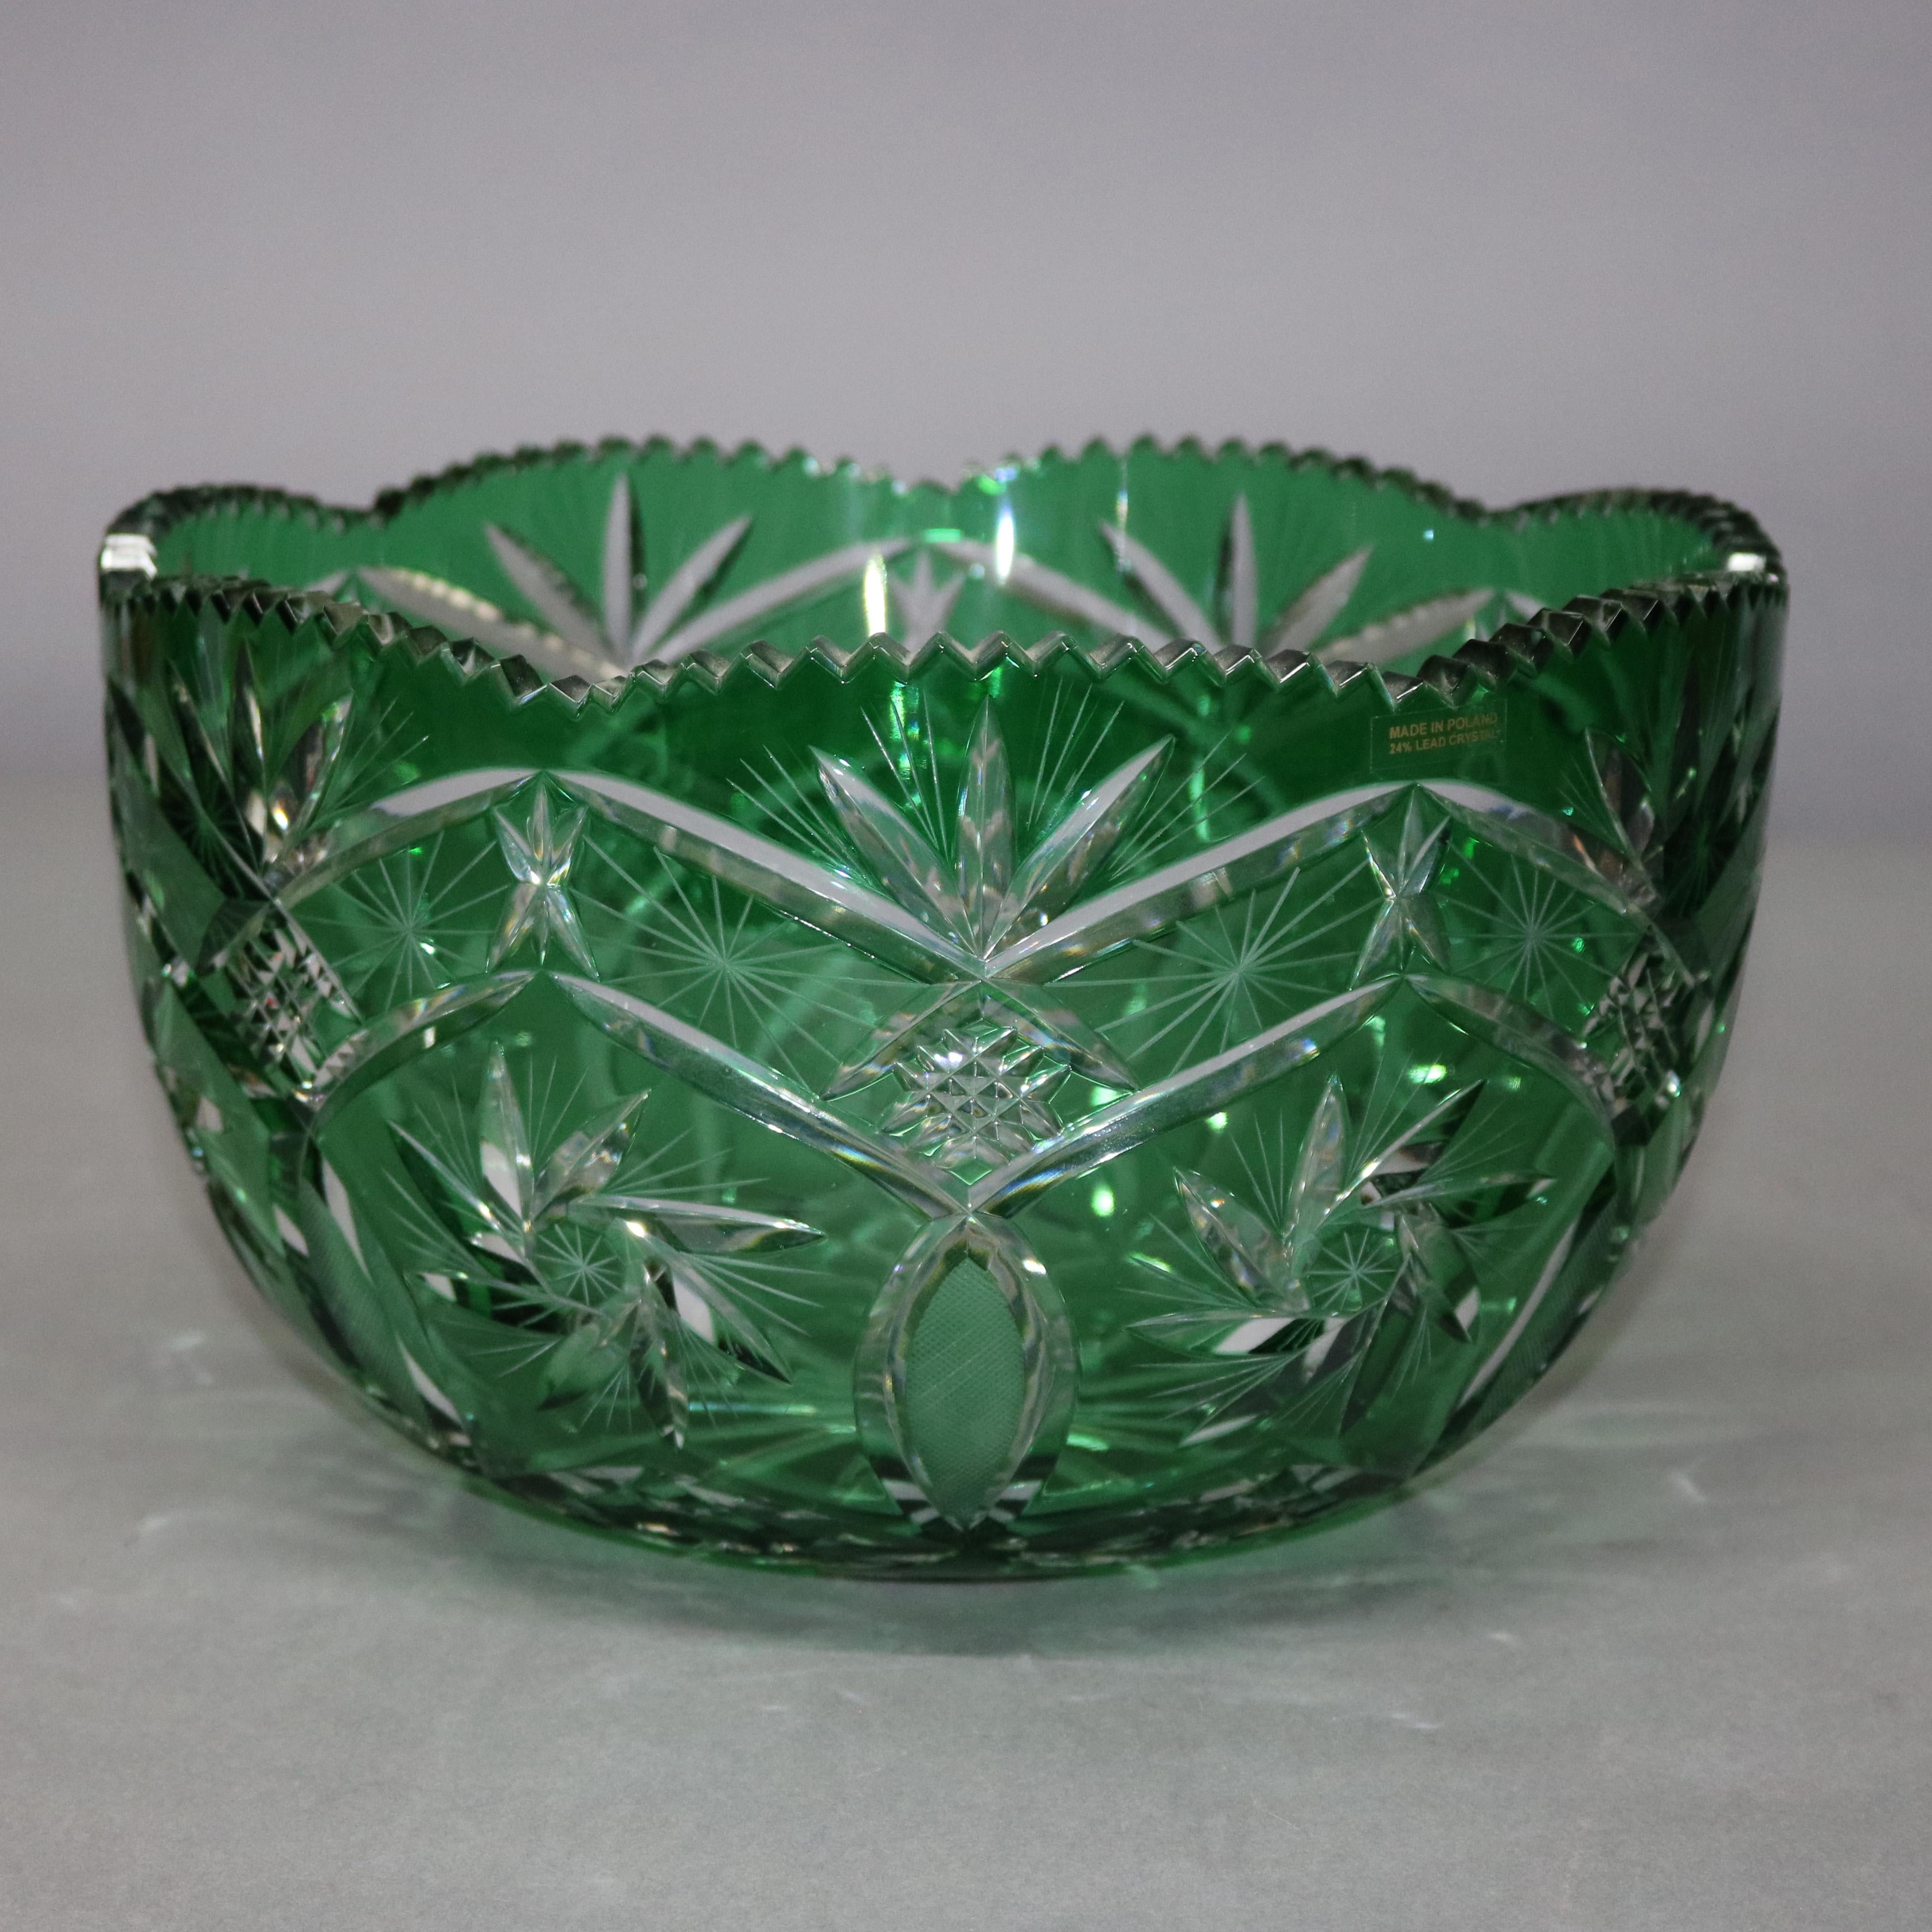 An antique Bohemian glass punch bowl offers emerald green cut to clear design including star and pineapple with scalloped rim, circa 1880.

Measures: 6.5